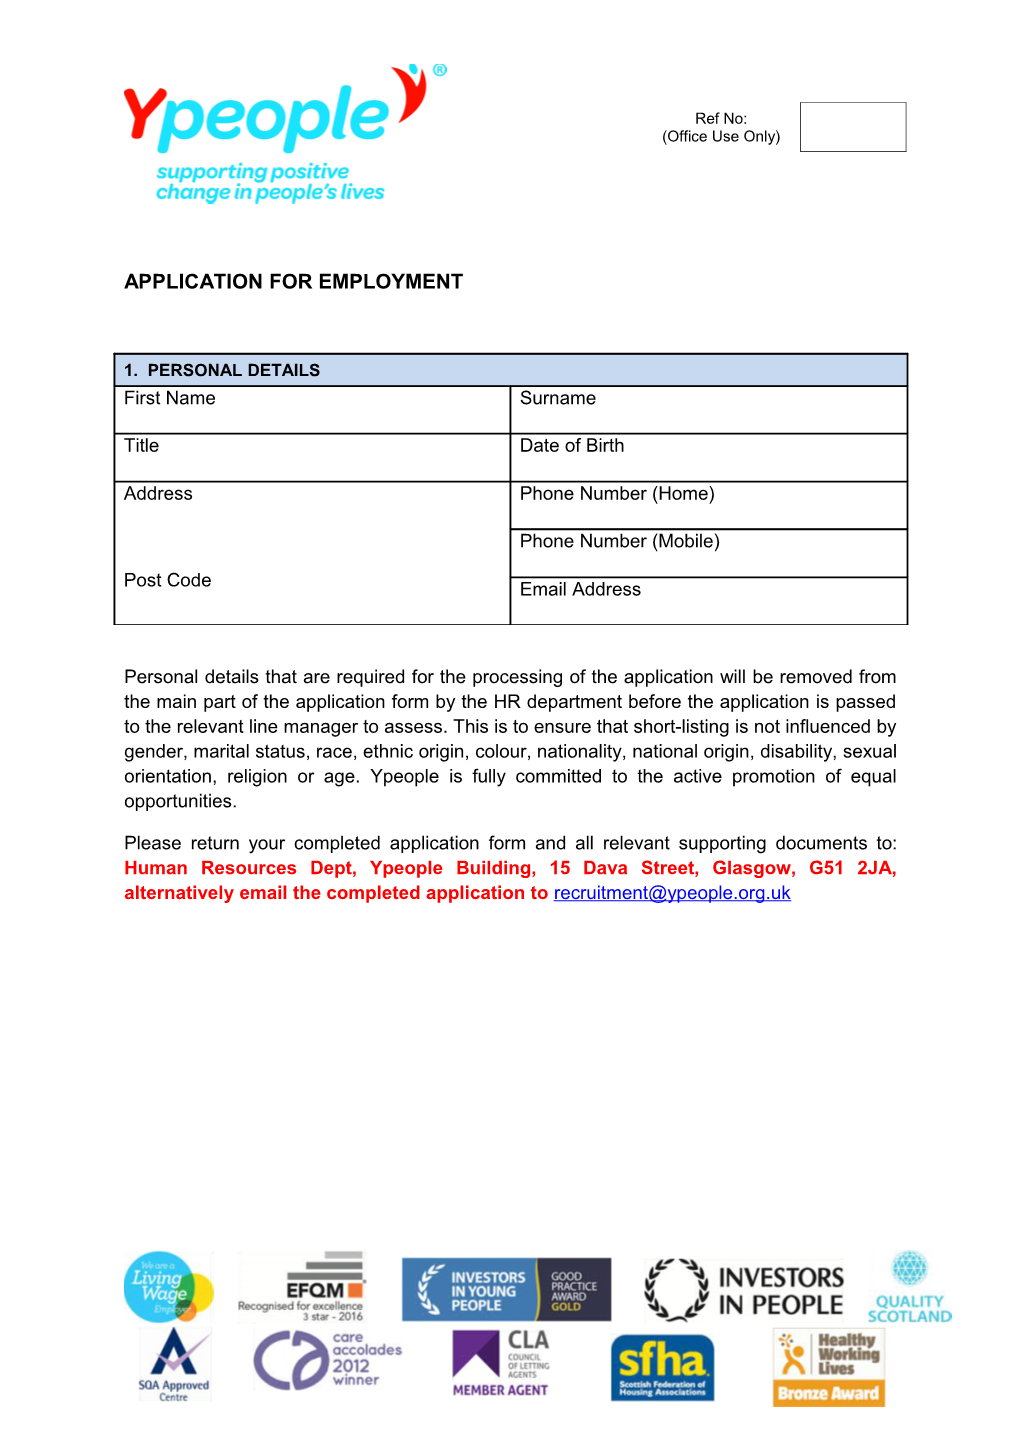 Application for Employment s106